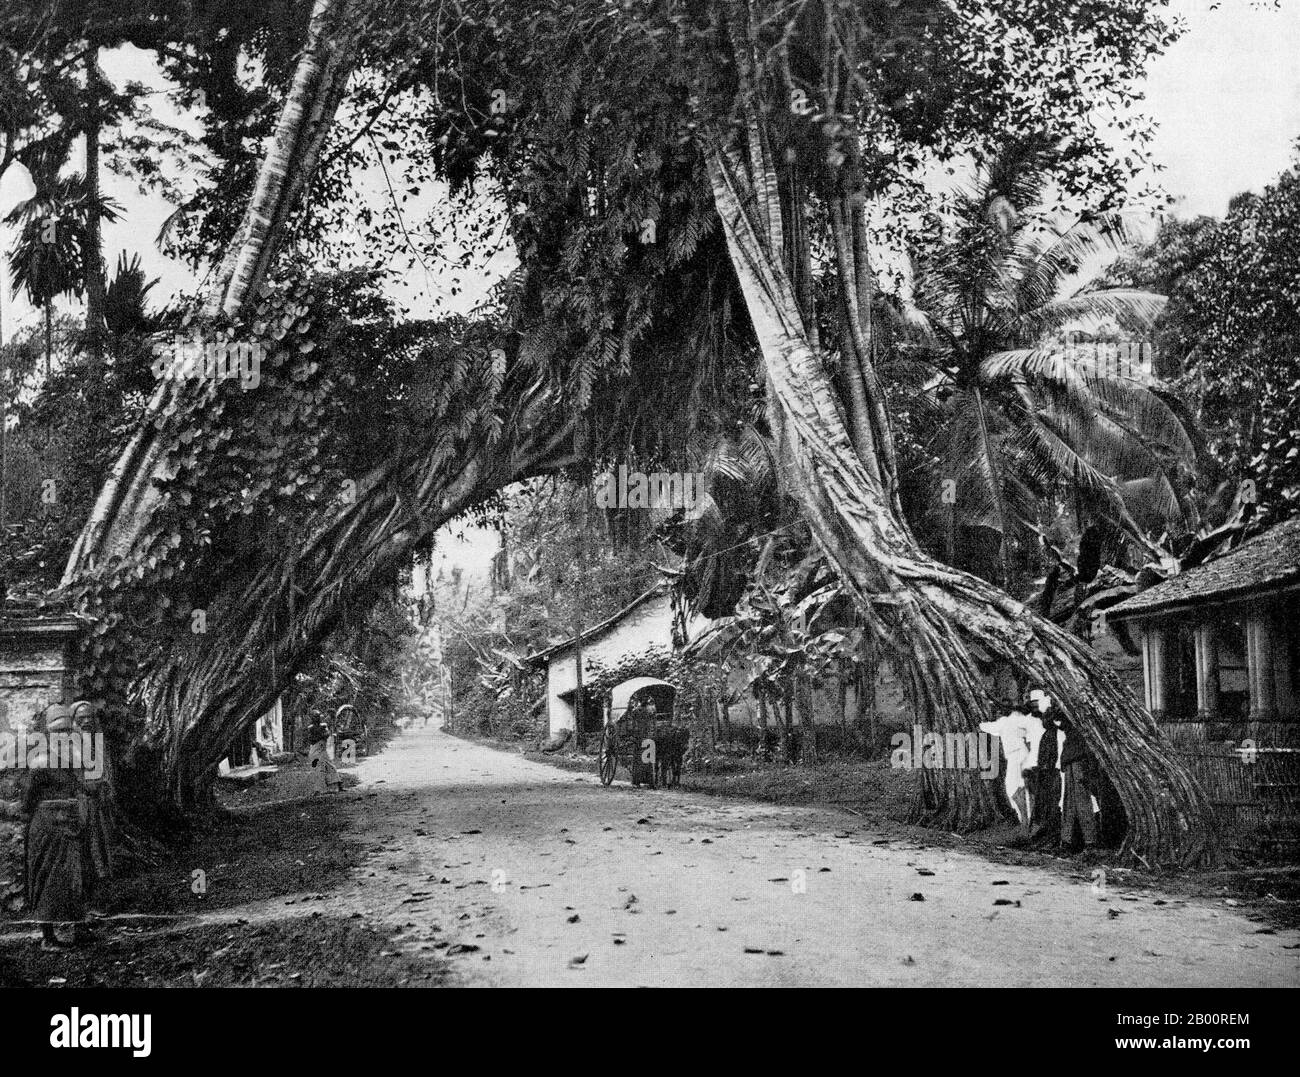 Sri Lanka: A Banyan tree in Kalutara bedecked with epiphytic lianas. Photograph by Ernst Haeckel (1834-1919), early 20th century.  Ernst Heinrich Philipp August Haeckel (February 16, 1834 – August 9, 1919), also written von Haeckel, was an eminent German biologist, naturalist, philosopher, physician, professor and artist who discovered, described and named thousands of new species, mapped a genealogical tree relating all life forms, and coined many terms in biology, including anthropogeny, ecology, phylum, phylogeny, and the kingdom Protista. Stock Photo